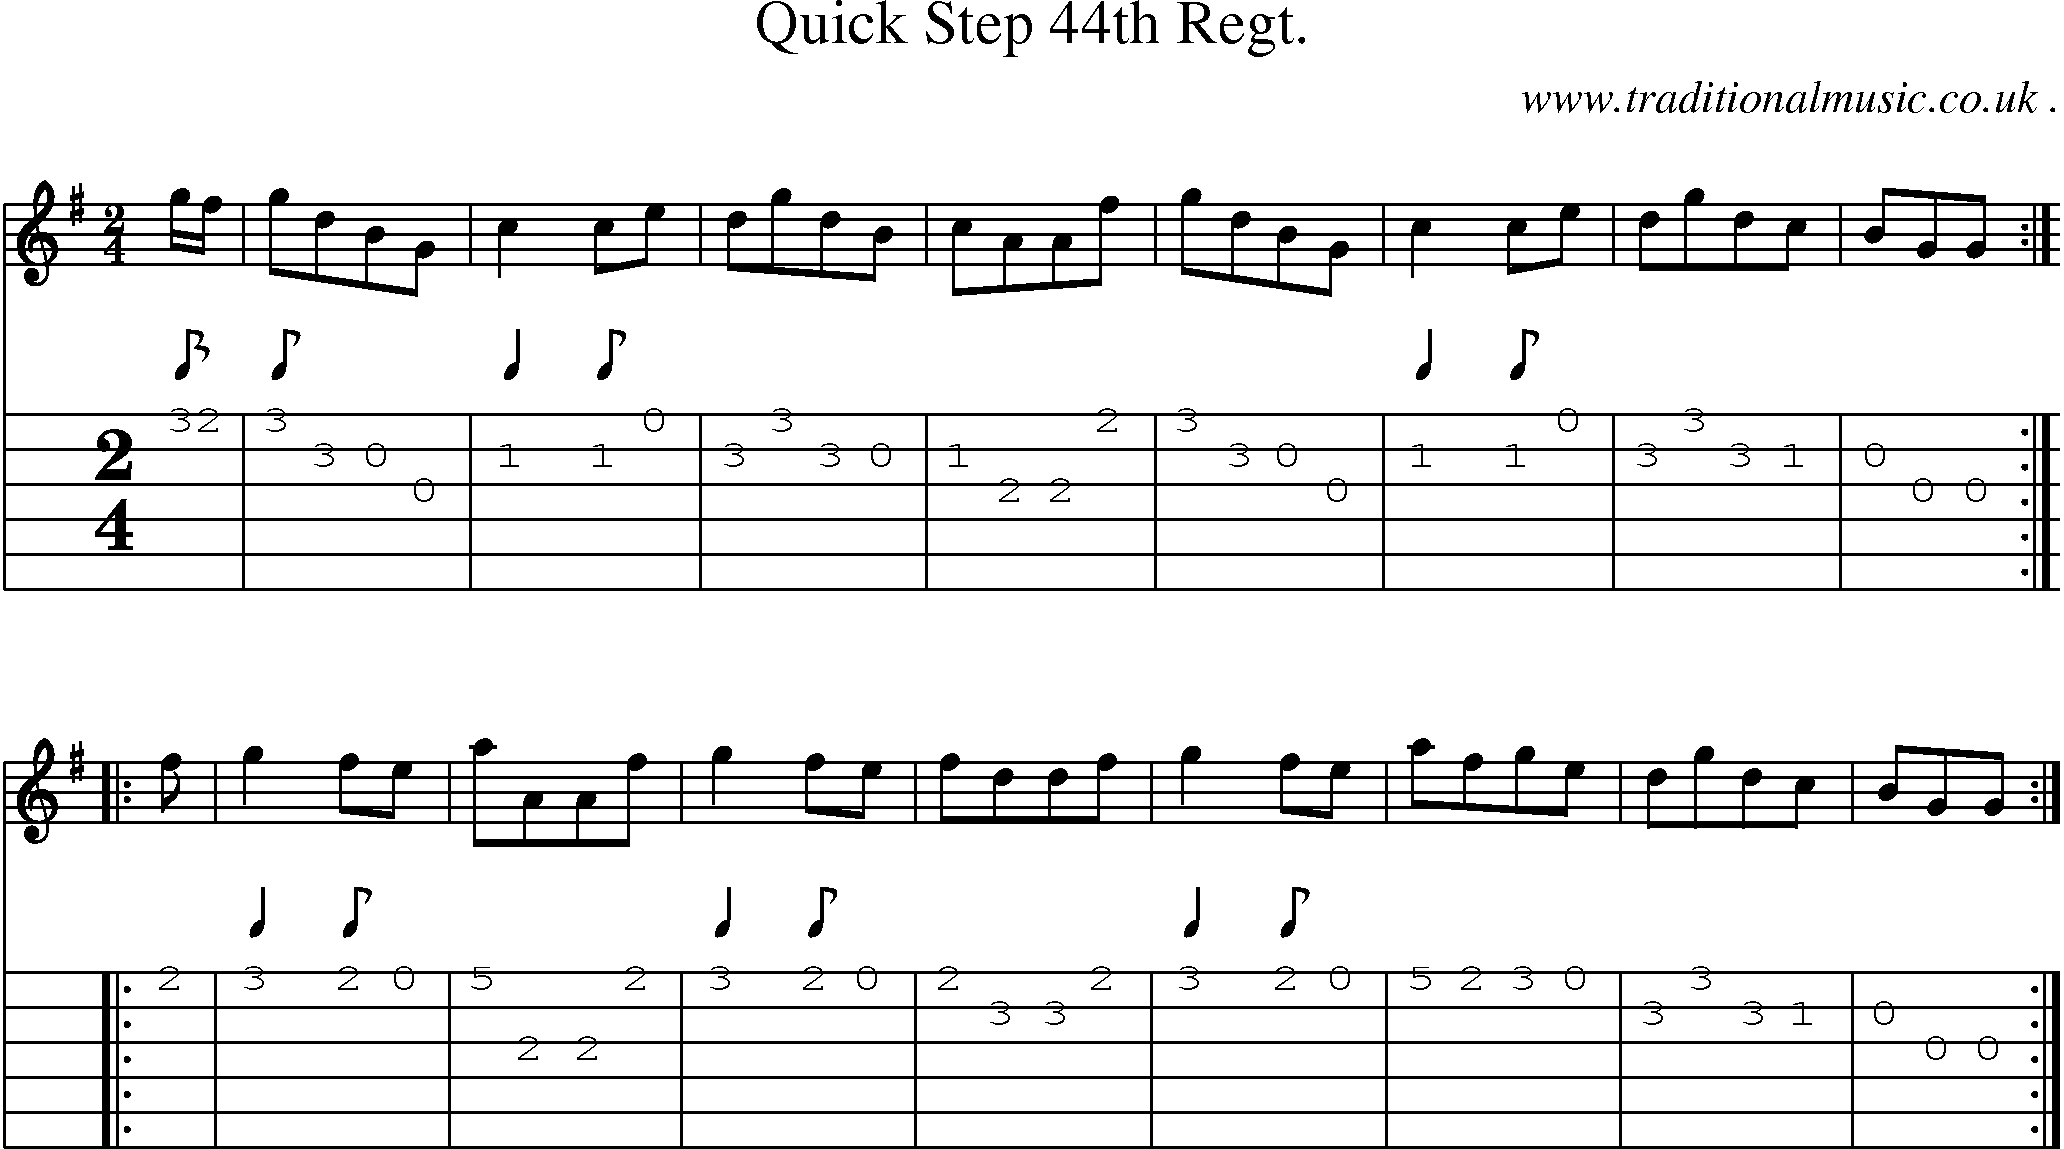 Sheet-Music and Guitar Tabs for Quick Step 44th Regt